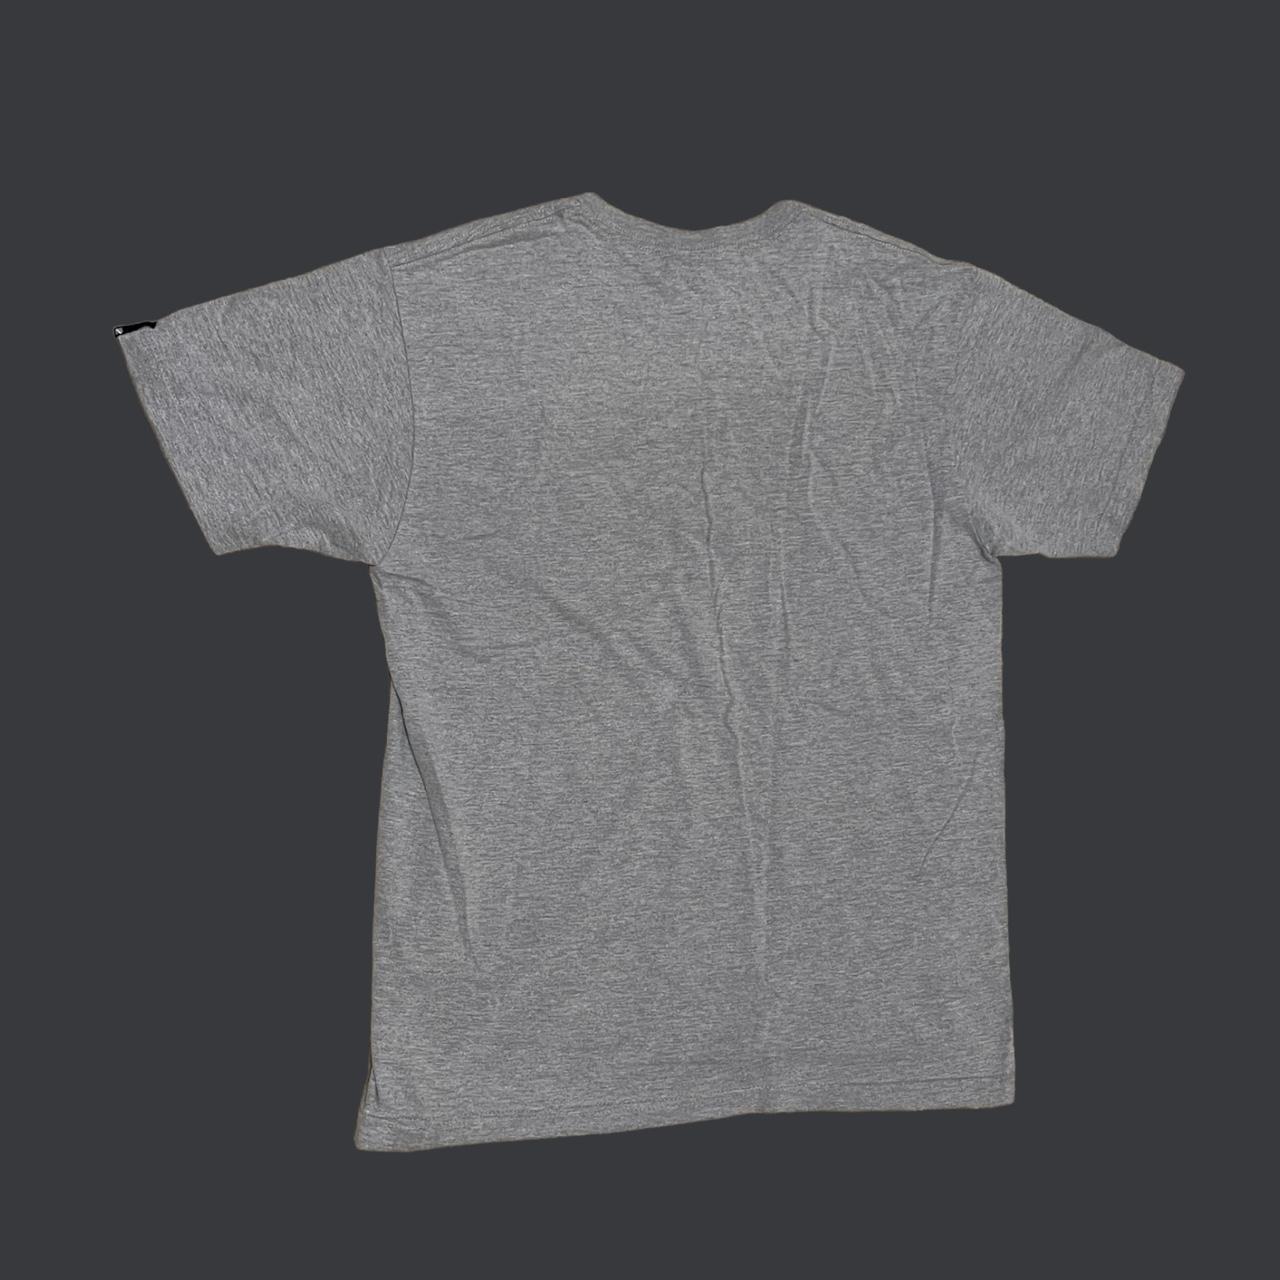 Undefeated Men's Grey and Black T-shirt (2)